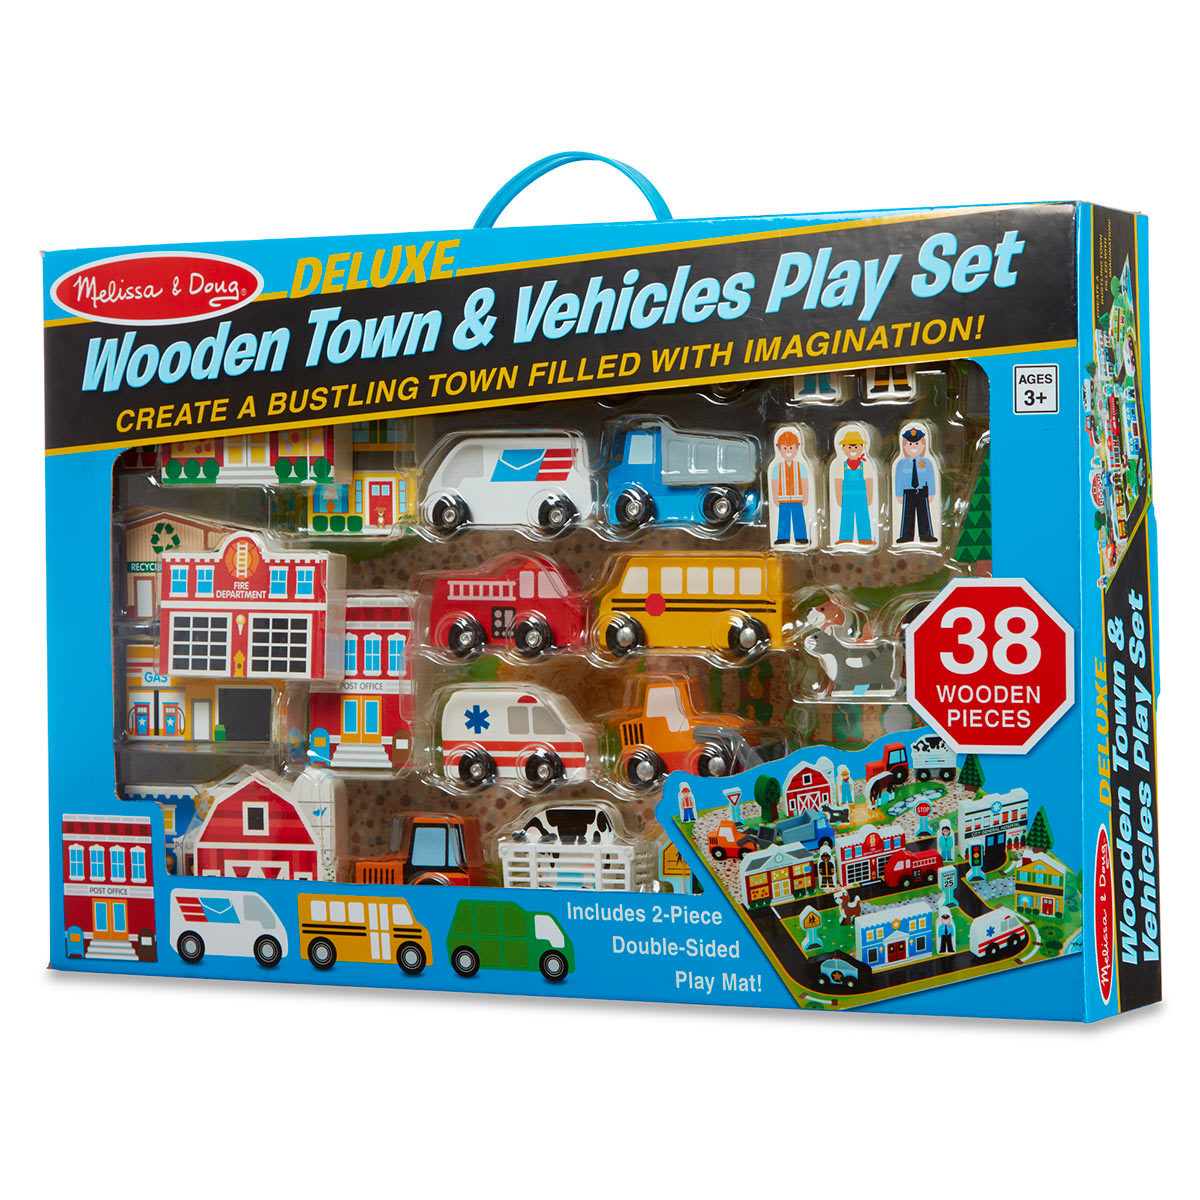 Wooden town and vehicles play set boxed image